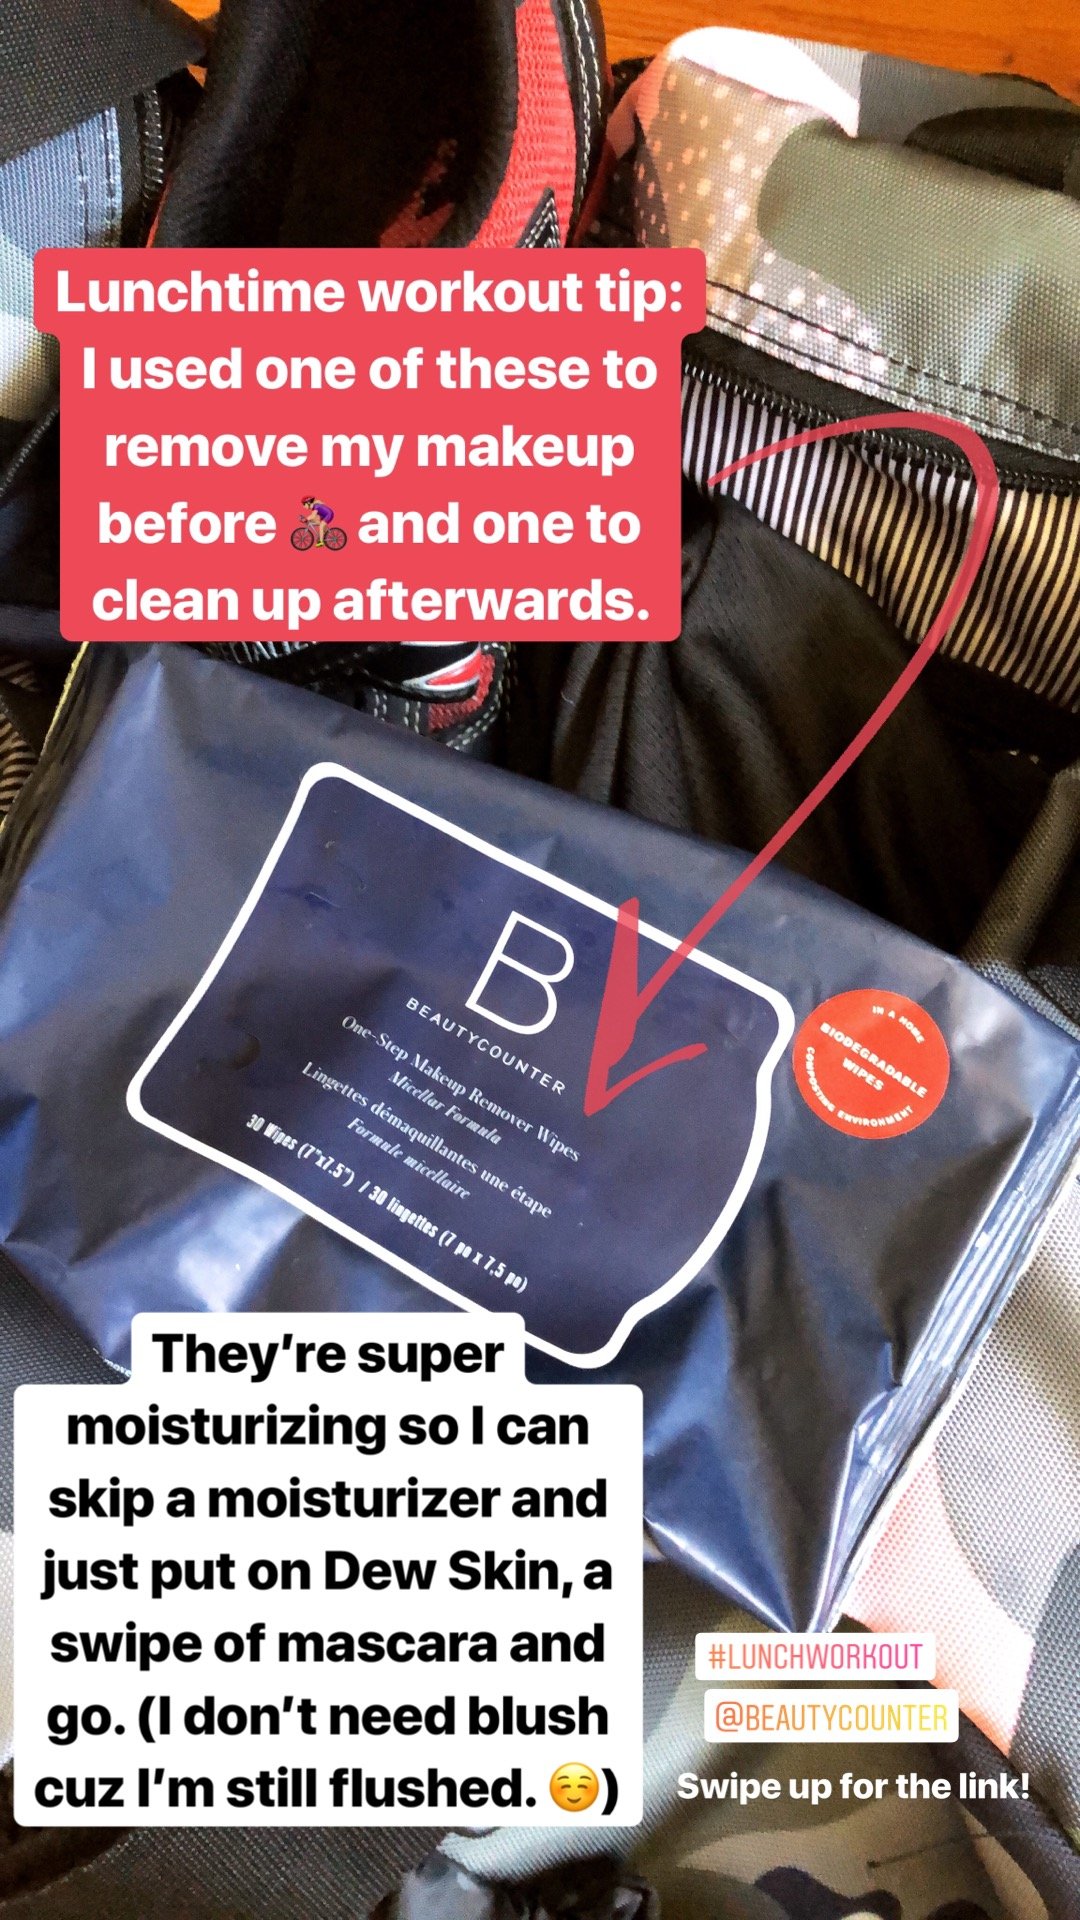 beautycounter makeup remover wipes